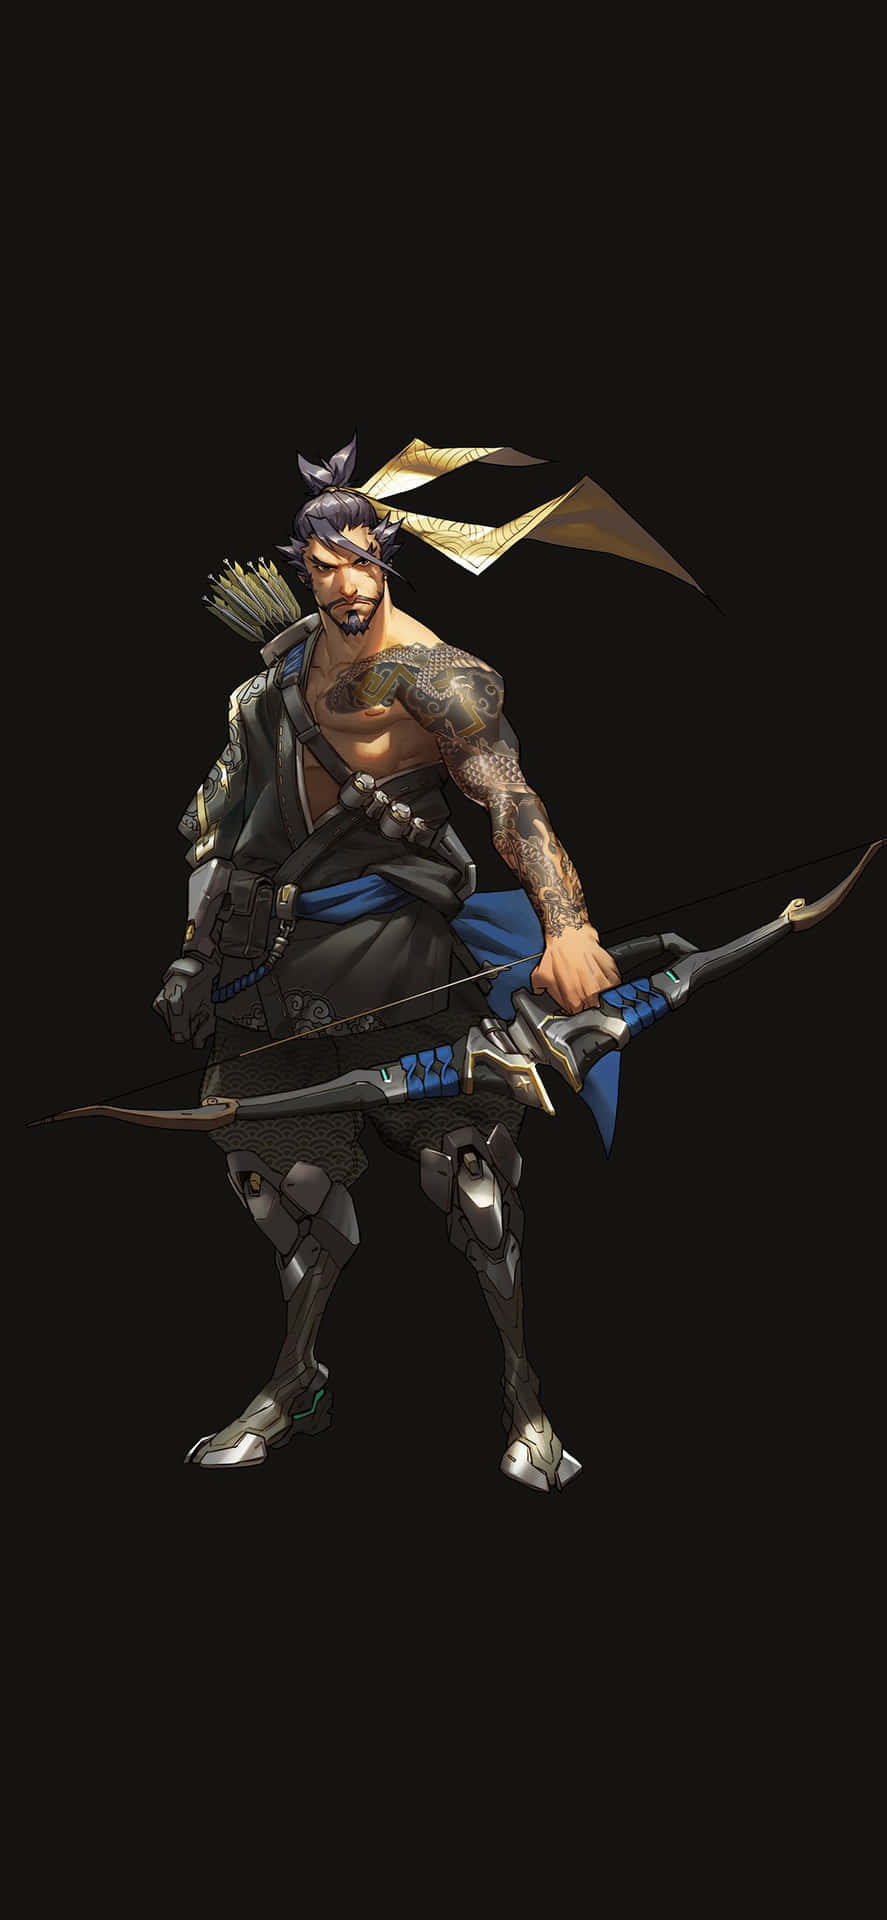 Hanzo, the Master Archer from Overwatch Wallpaper